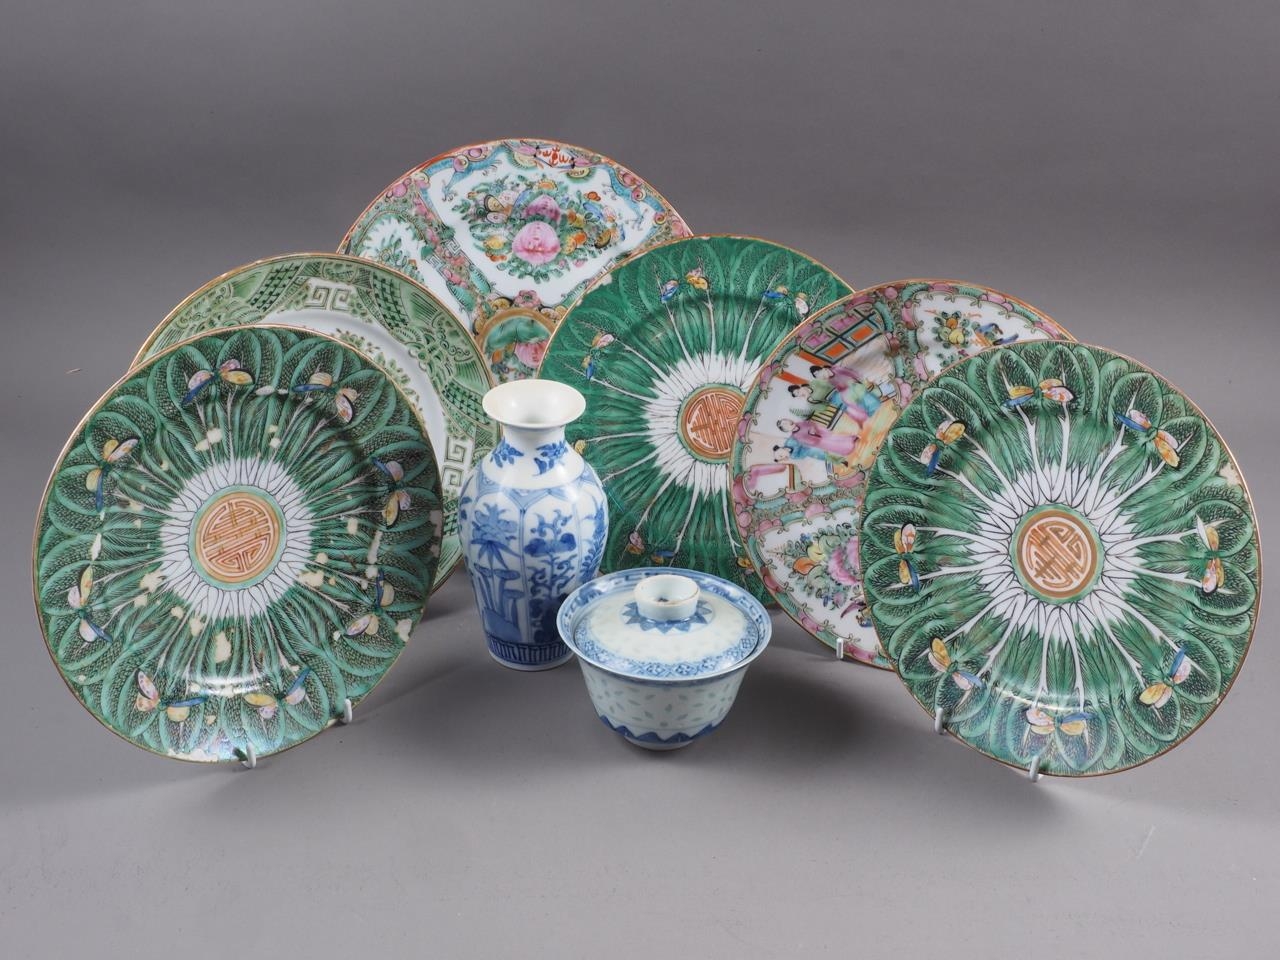 Three Chinese famille verte plates with leaf and butterfly decoration, 8 3/4" high, another